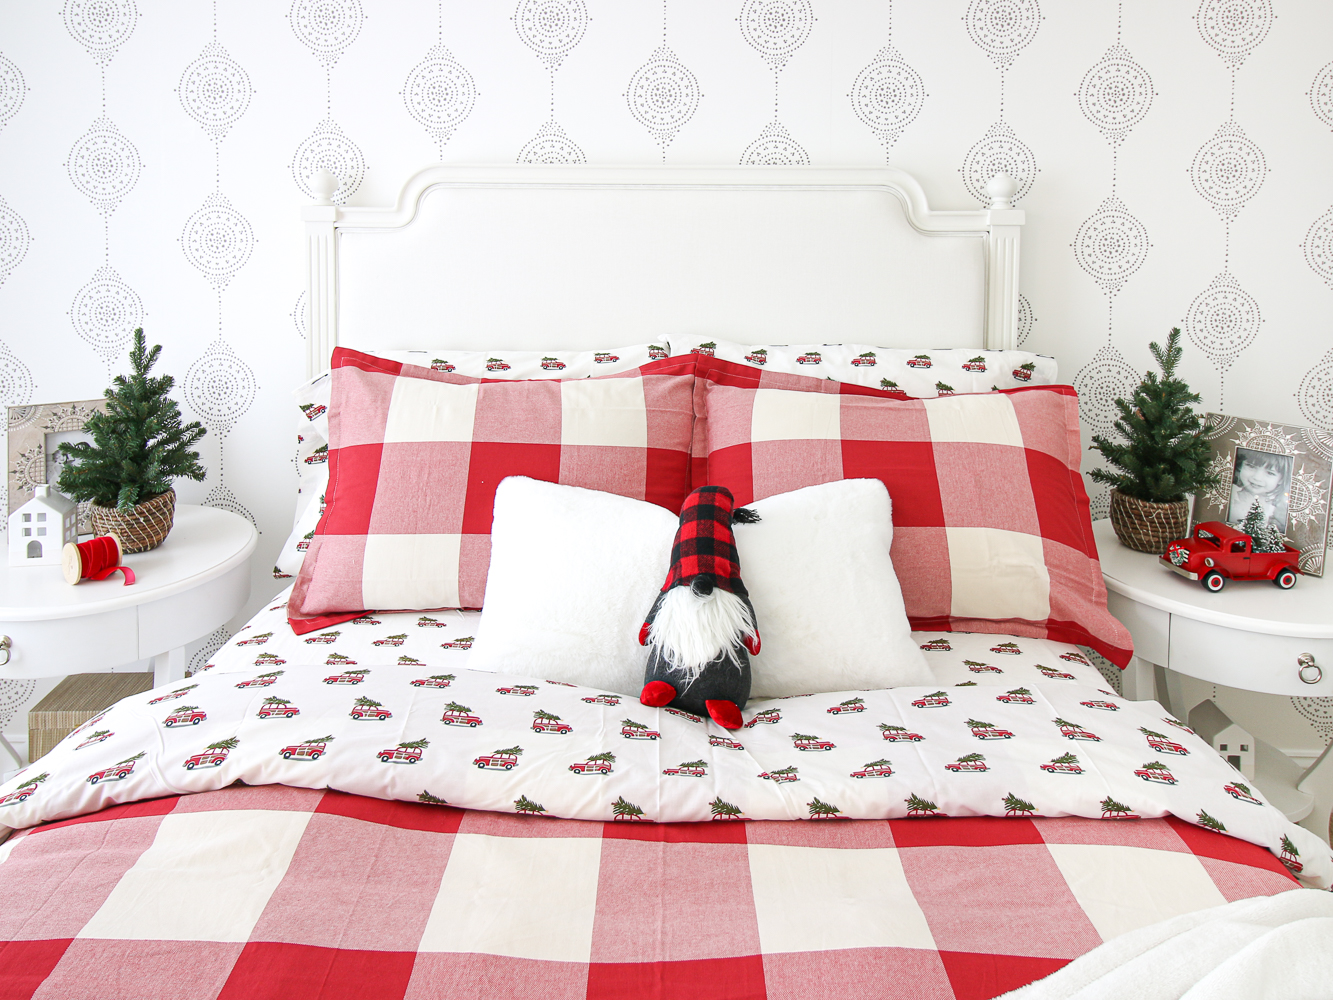 Girl's Christmas bedroom, gnome, mini trees, red and white bedding, sheets with red truck and trees, Serena and Lily wallpaper